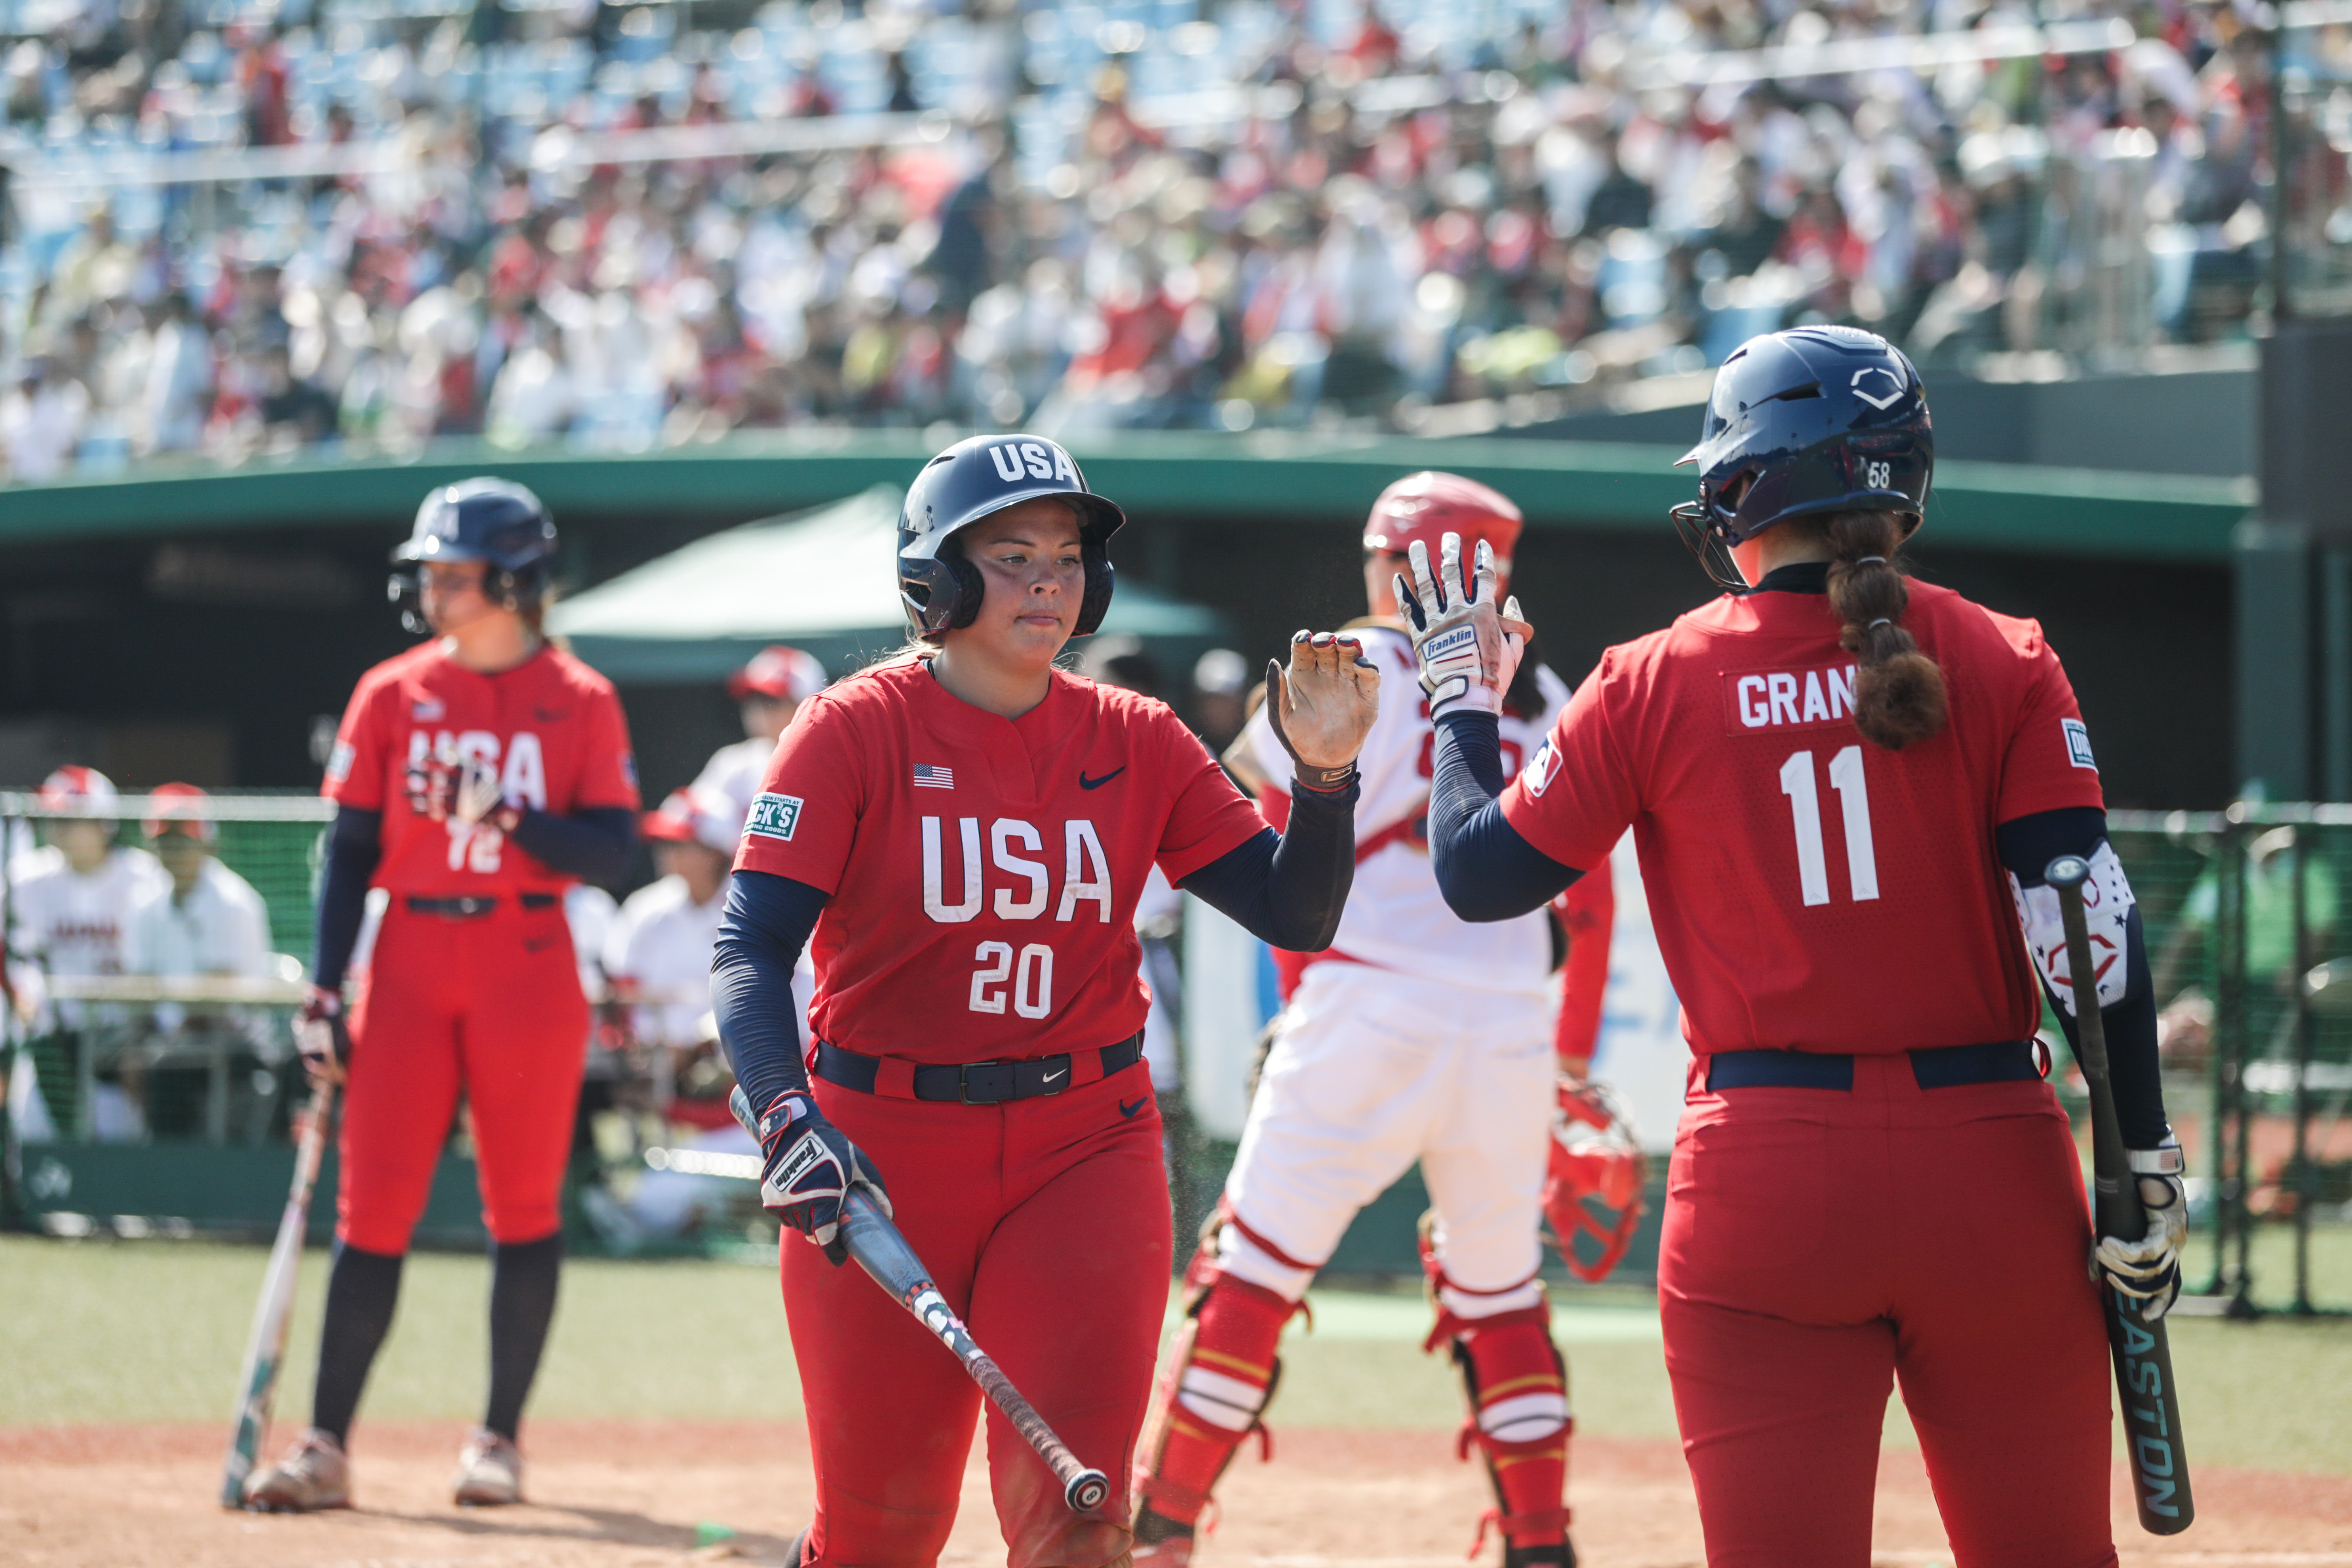 Team USA drops Game 2 of Japan All-Star Series behind 6-1 loss to even the series, 1-1 featured image